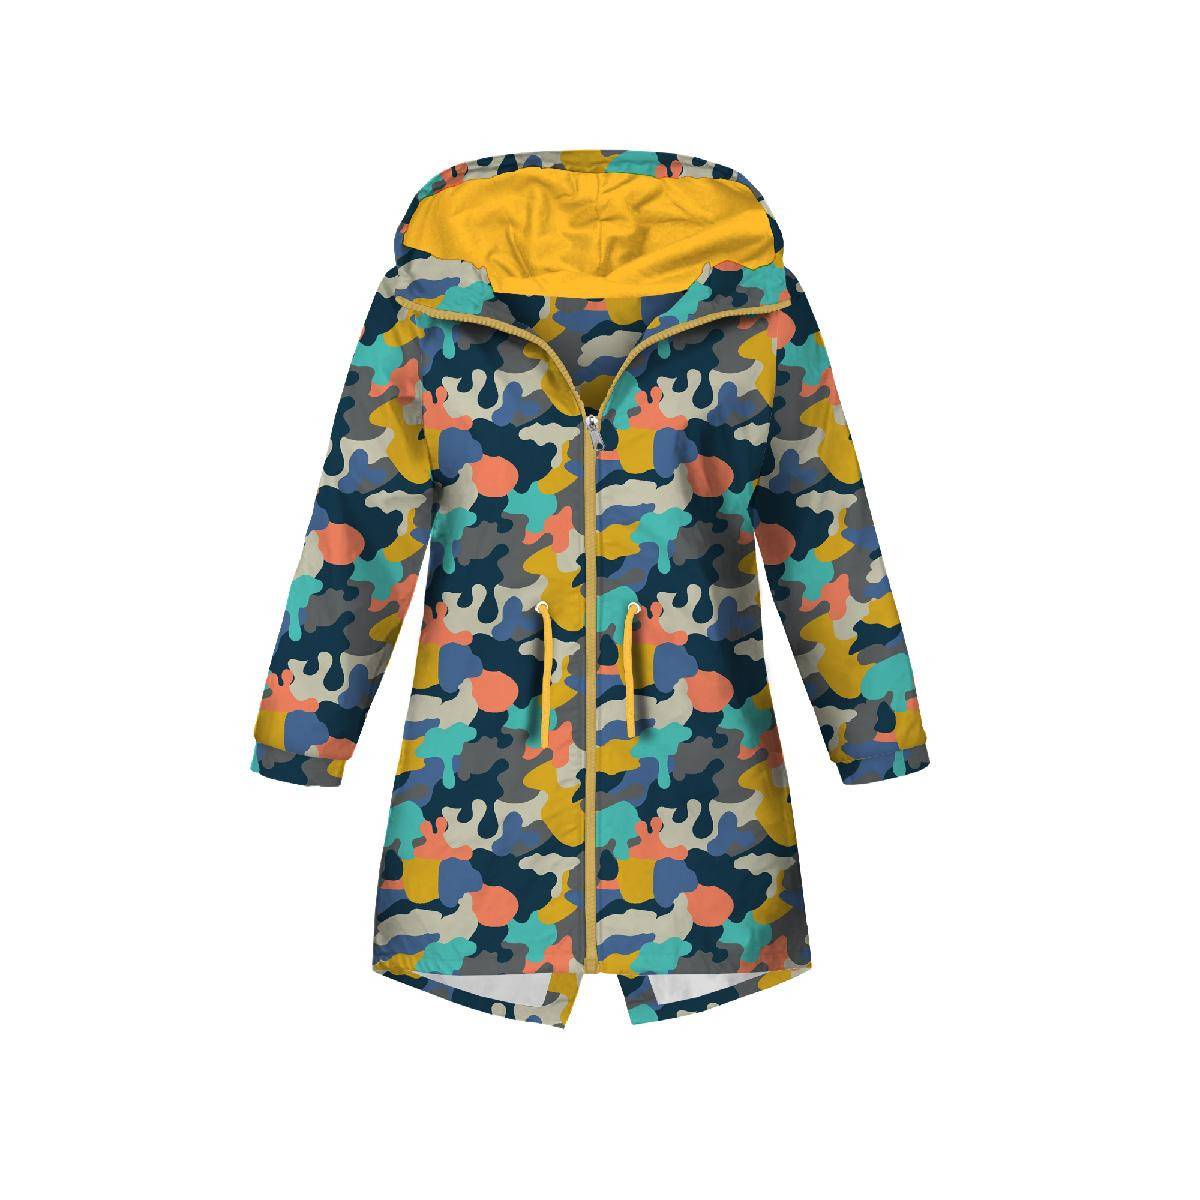 KIDS PARKA (ARIEL) - CAMOUFLAGE COLORFUL pat. 2 - softshell